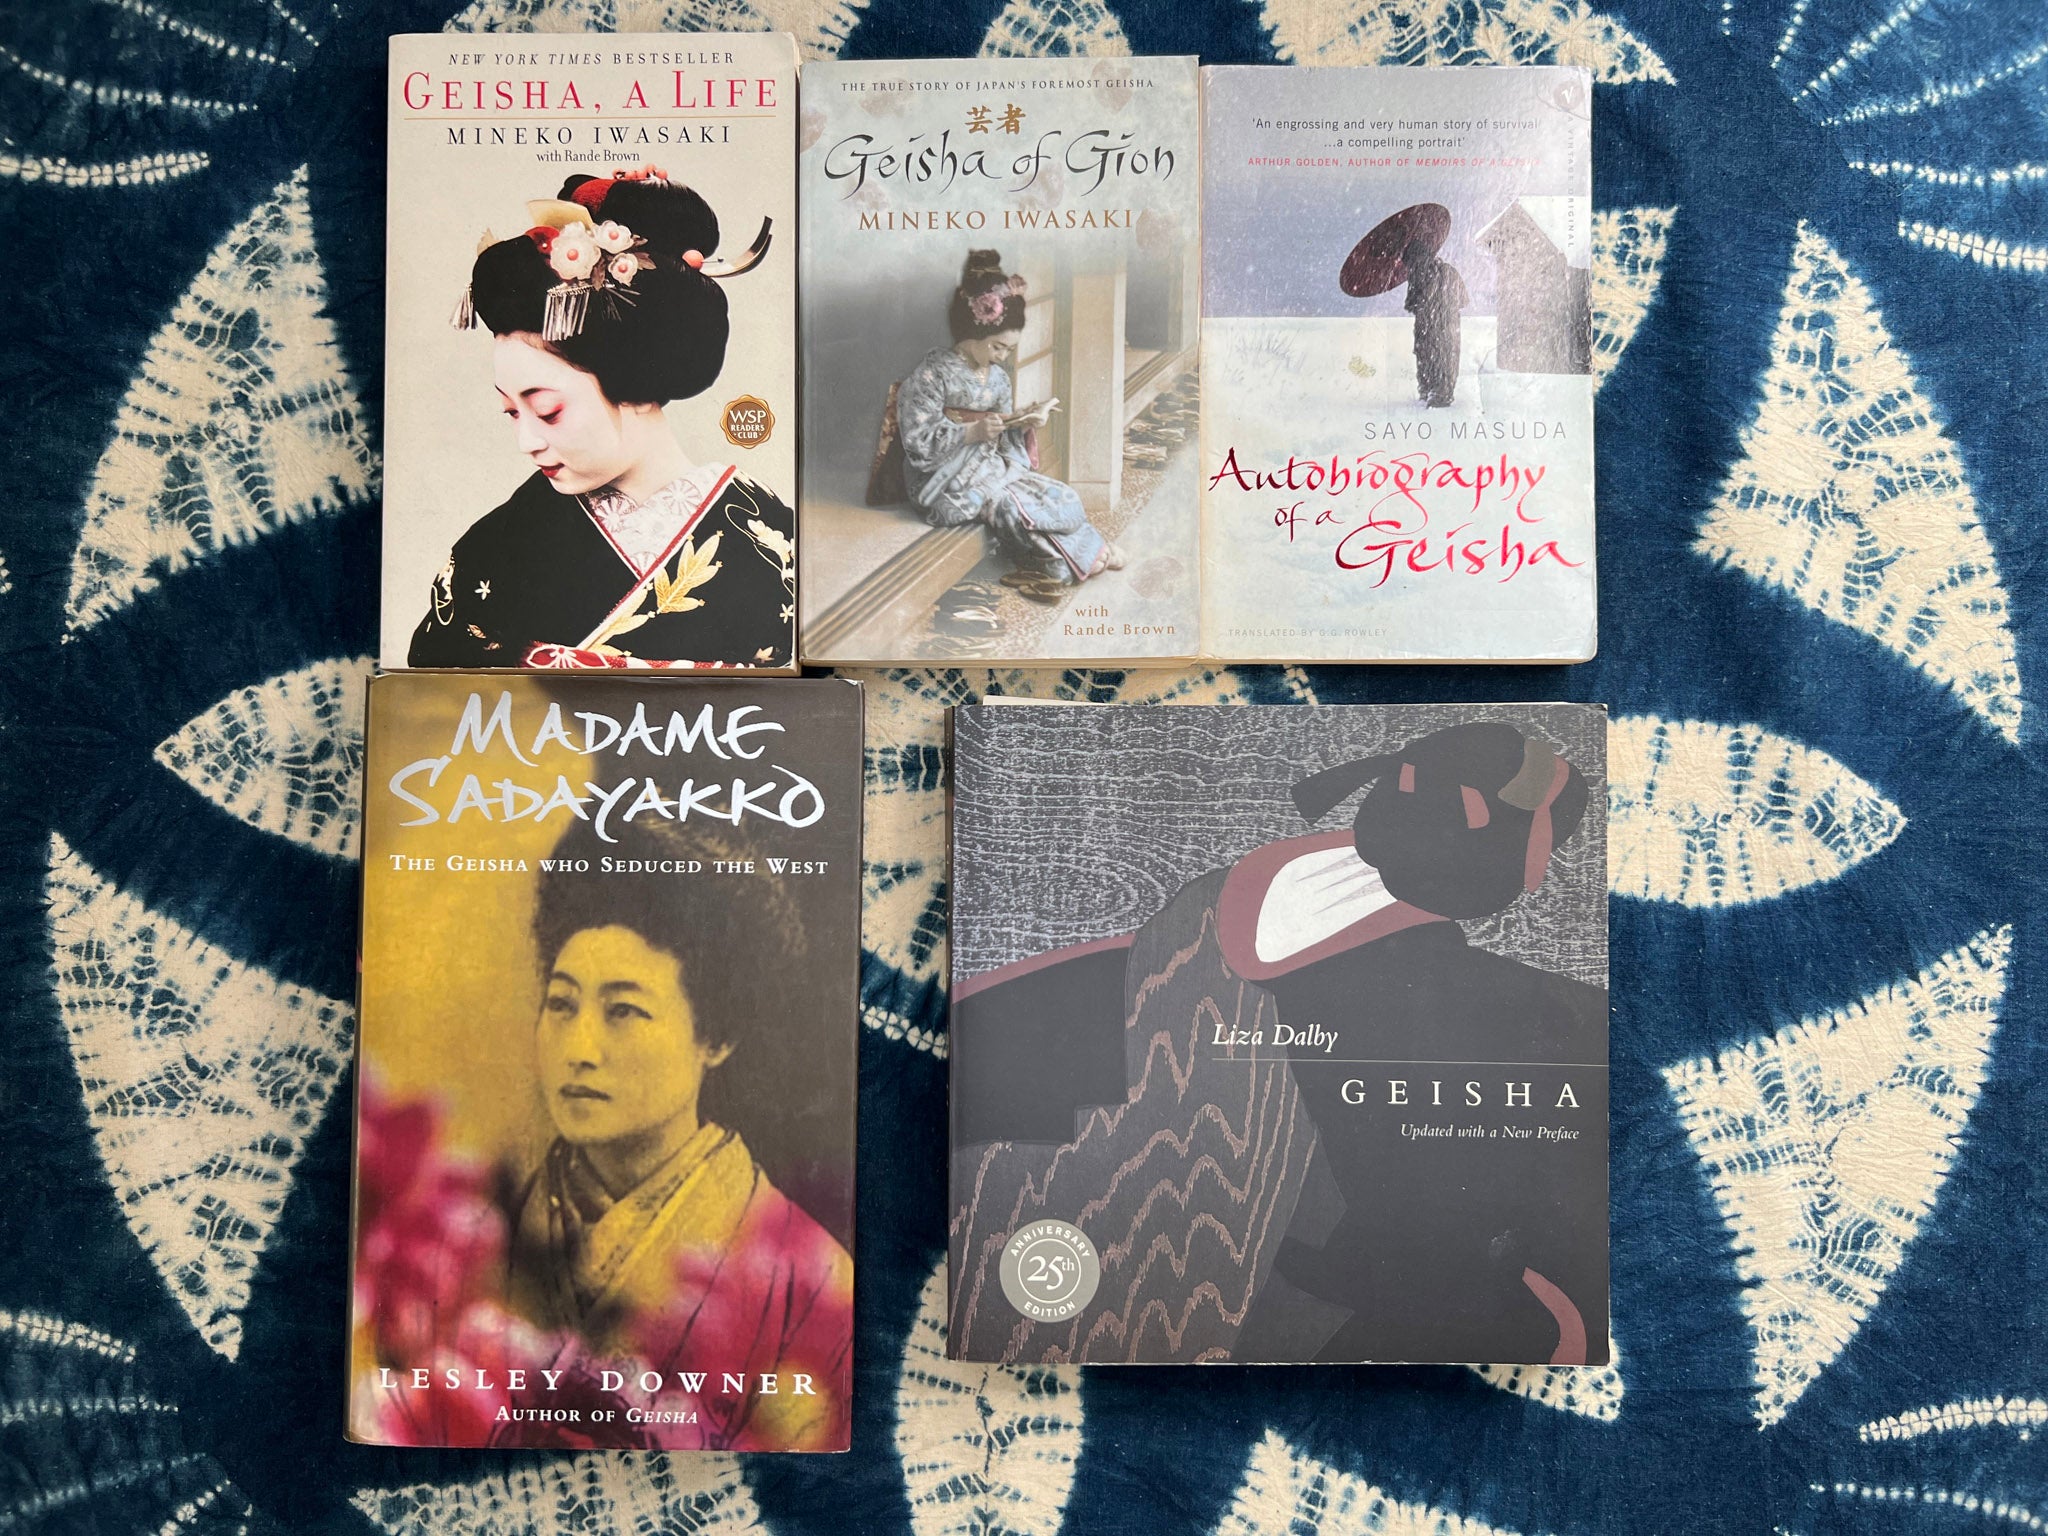 Books about Geisha in the library of Patricia Belyea